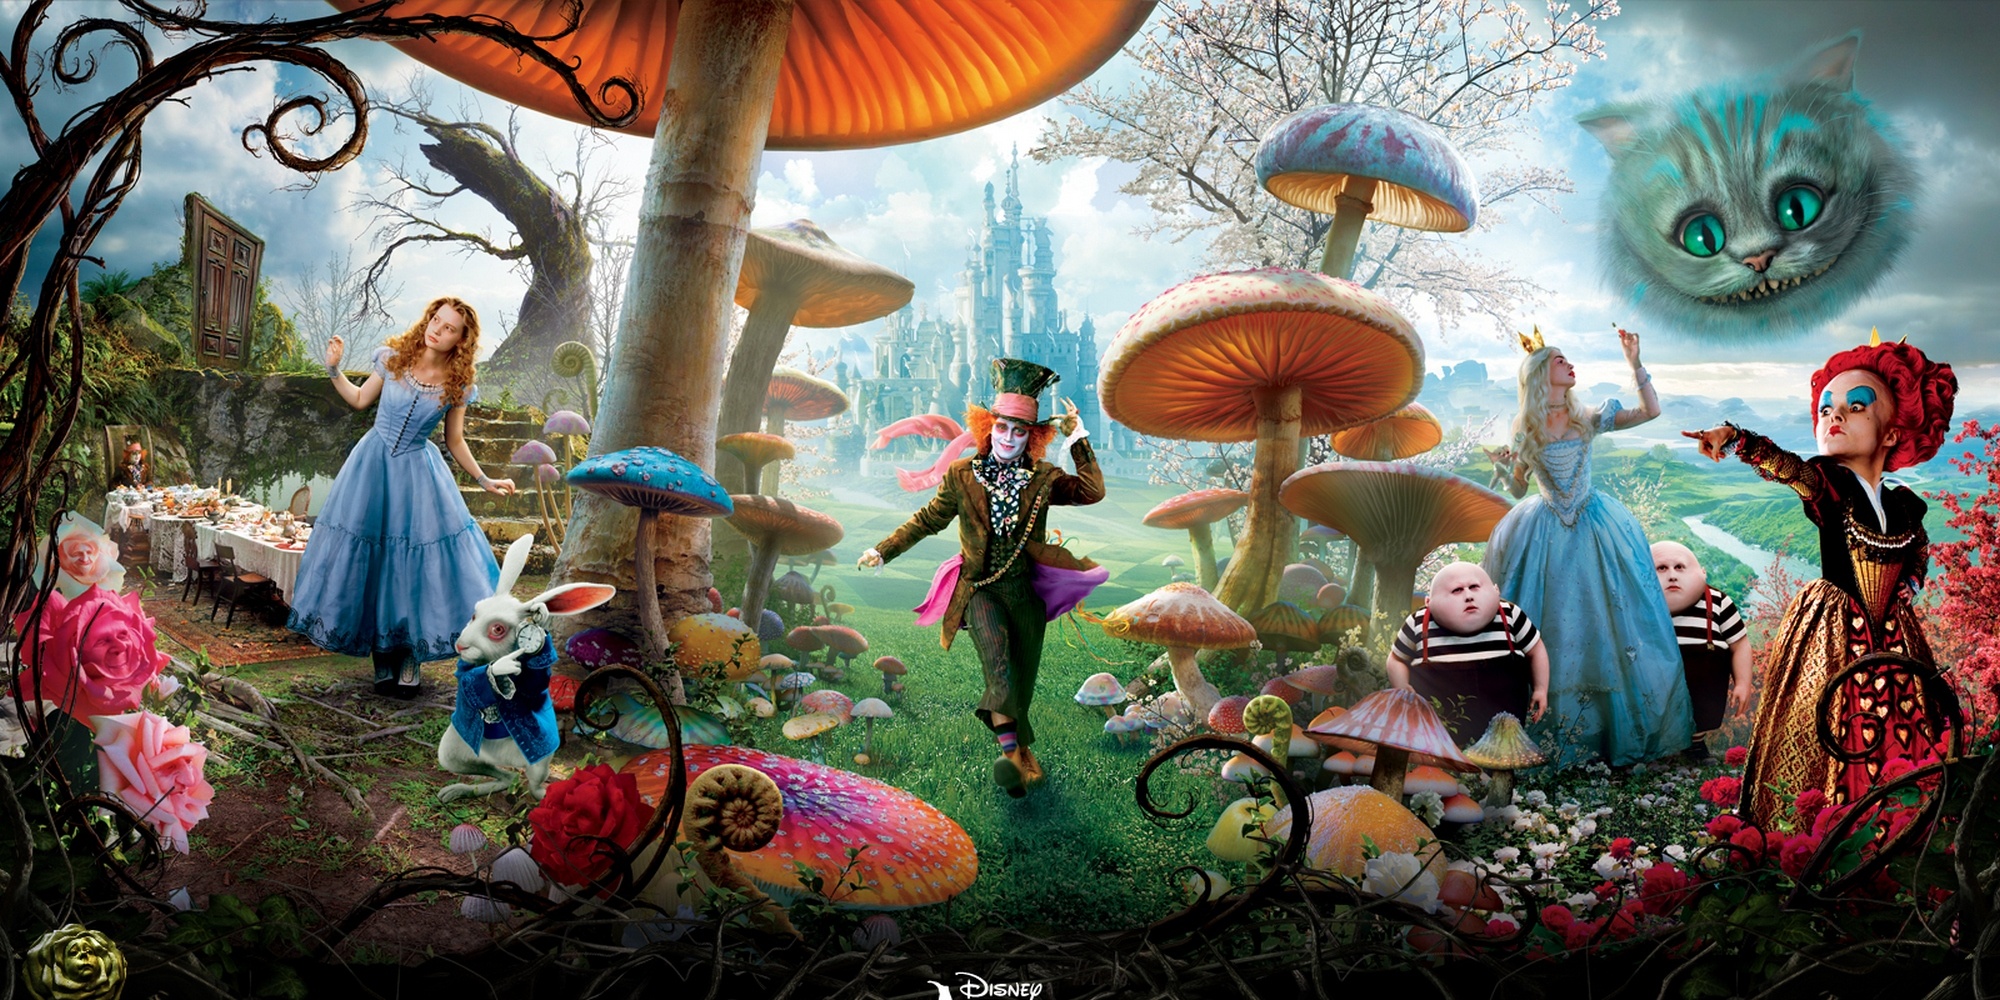 Poster from The latest Alice in Wonderland film